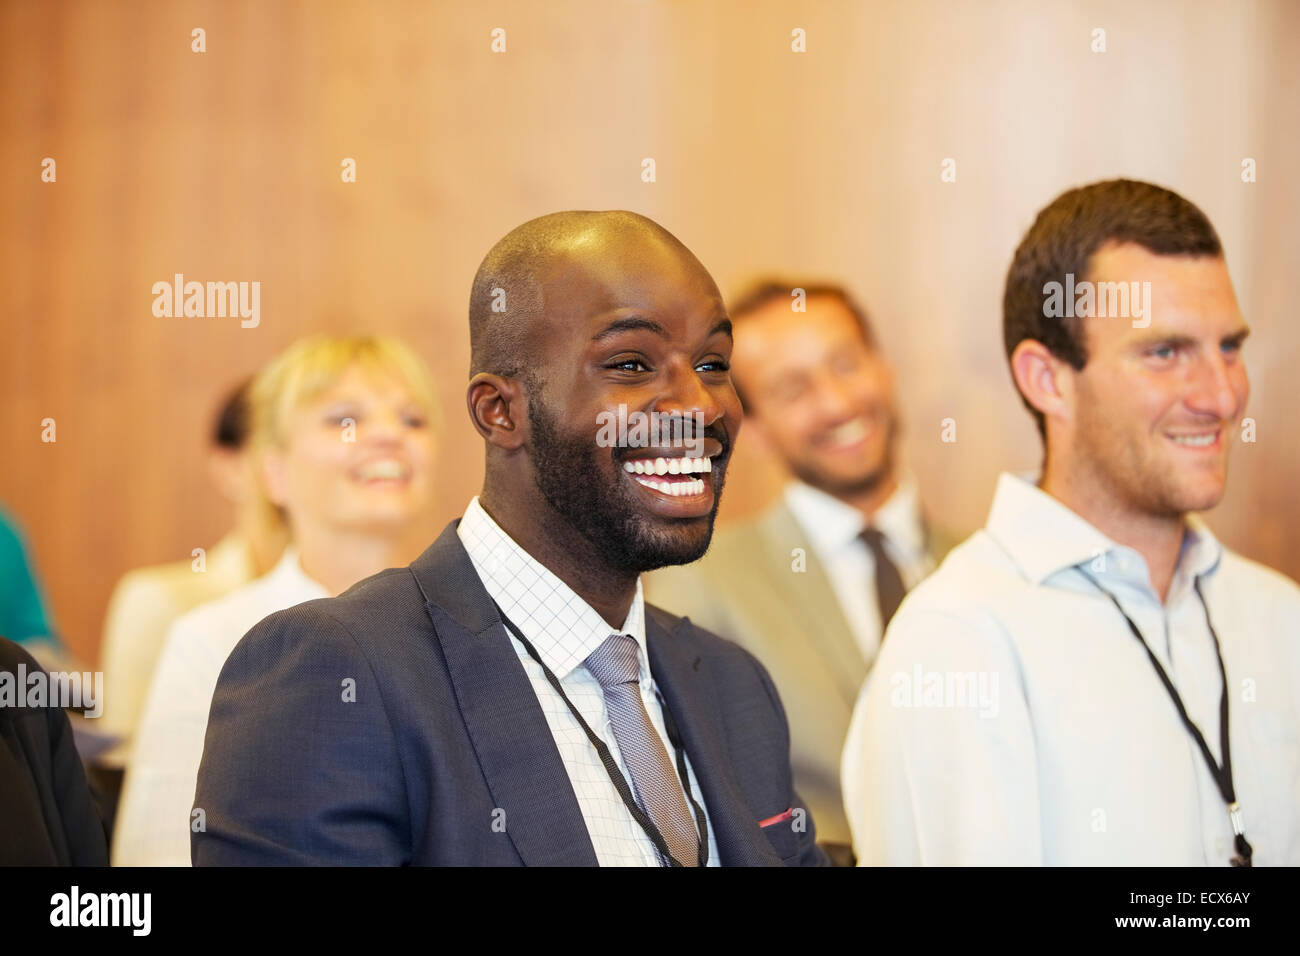 Portrait of two young men, one laughing, sitting in conference room Stock Photo